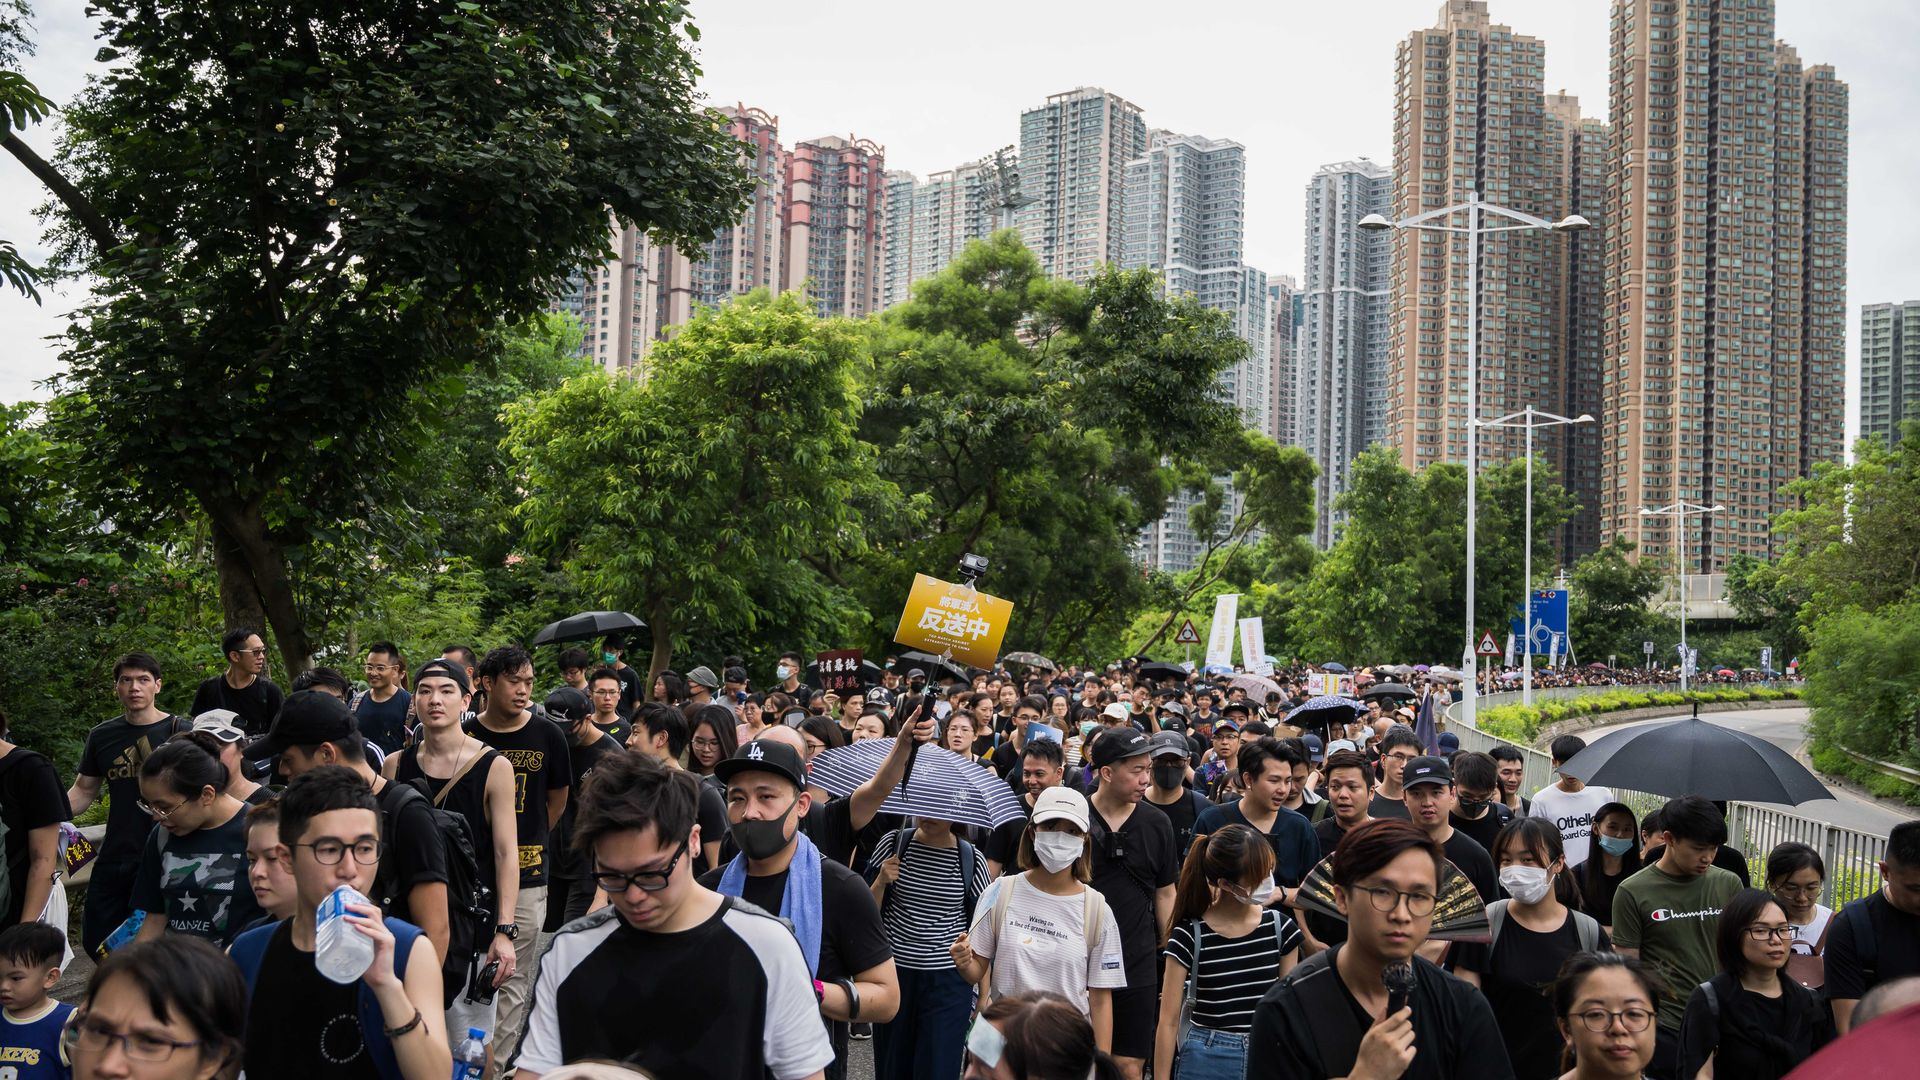 : Demonstrators march during a protest in the Tseung Kwan O district on Aug. 04, 2019 in Hong Kong